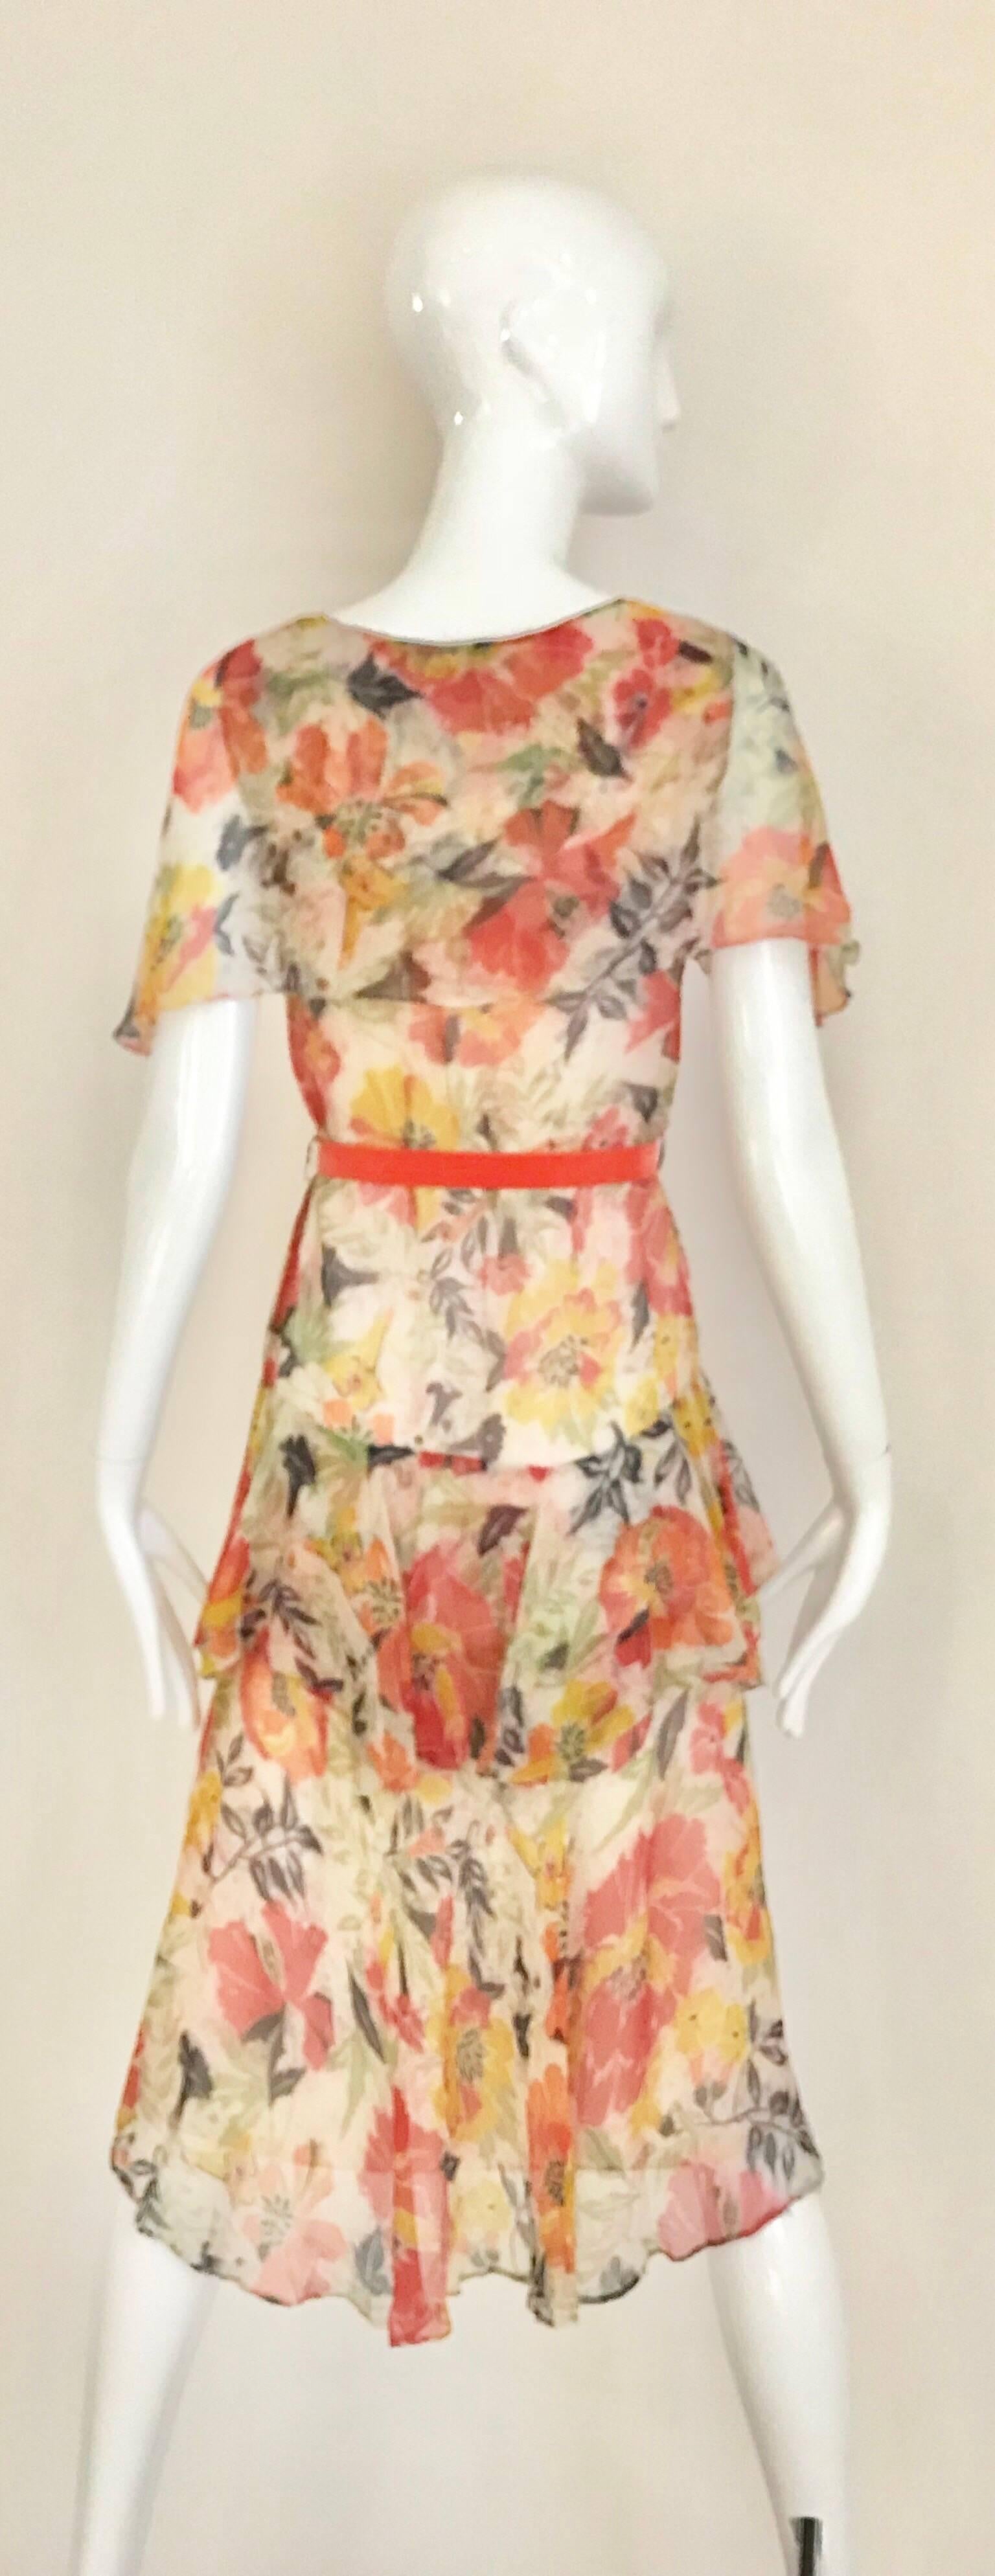 1920s floral print ( orange and yellow) silk print dress with orange velvet sash.
Fit size 0/2 XSmall. Dress is lined in cotton.
Bust: 32 inches